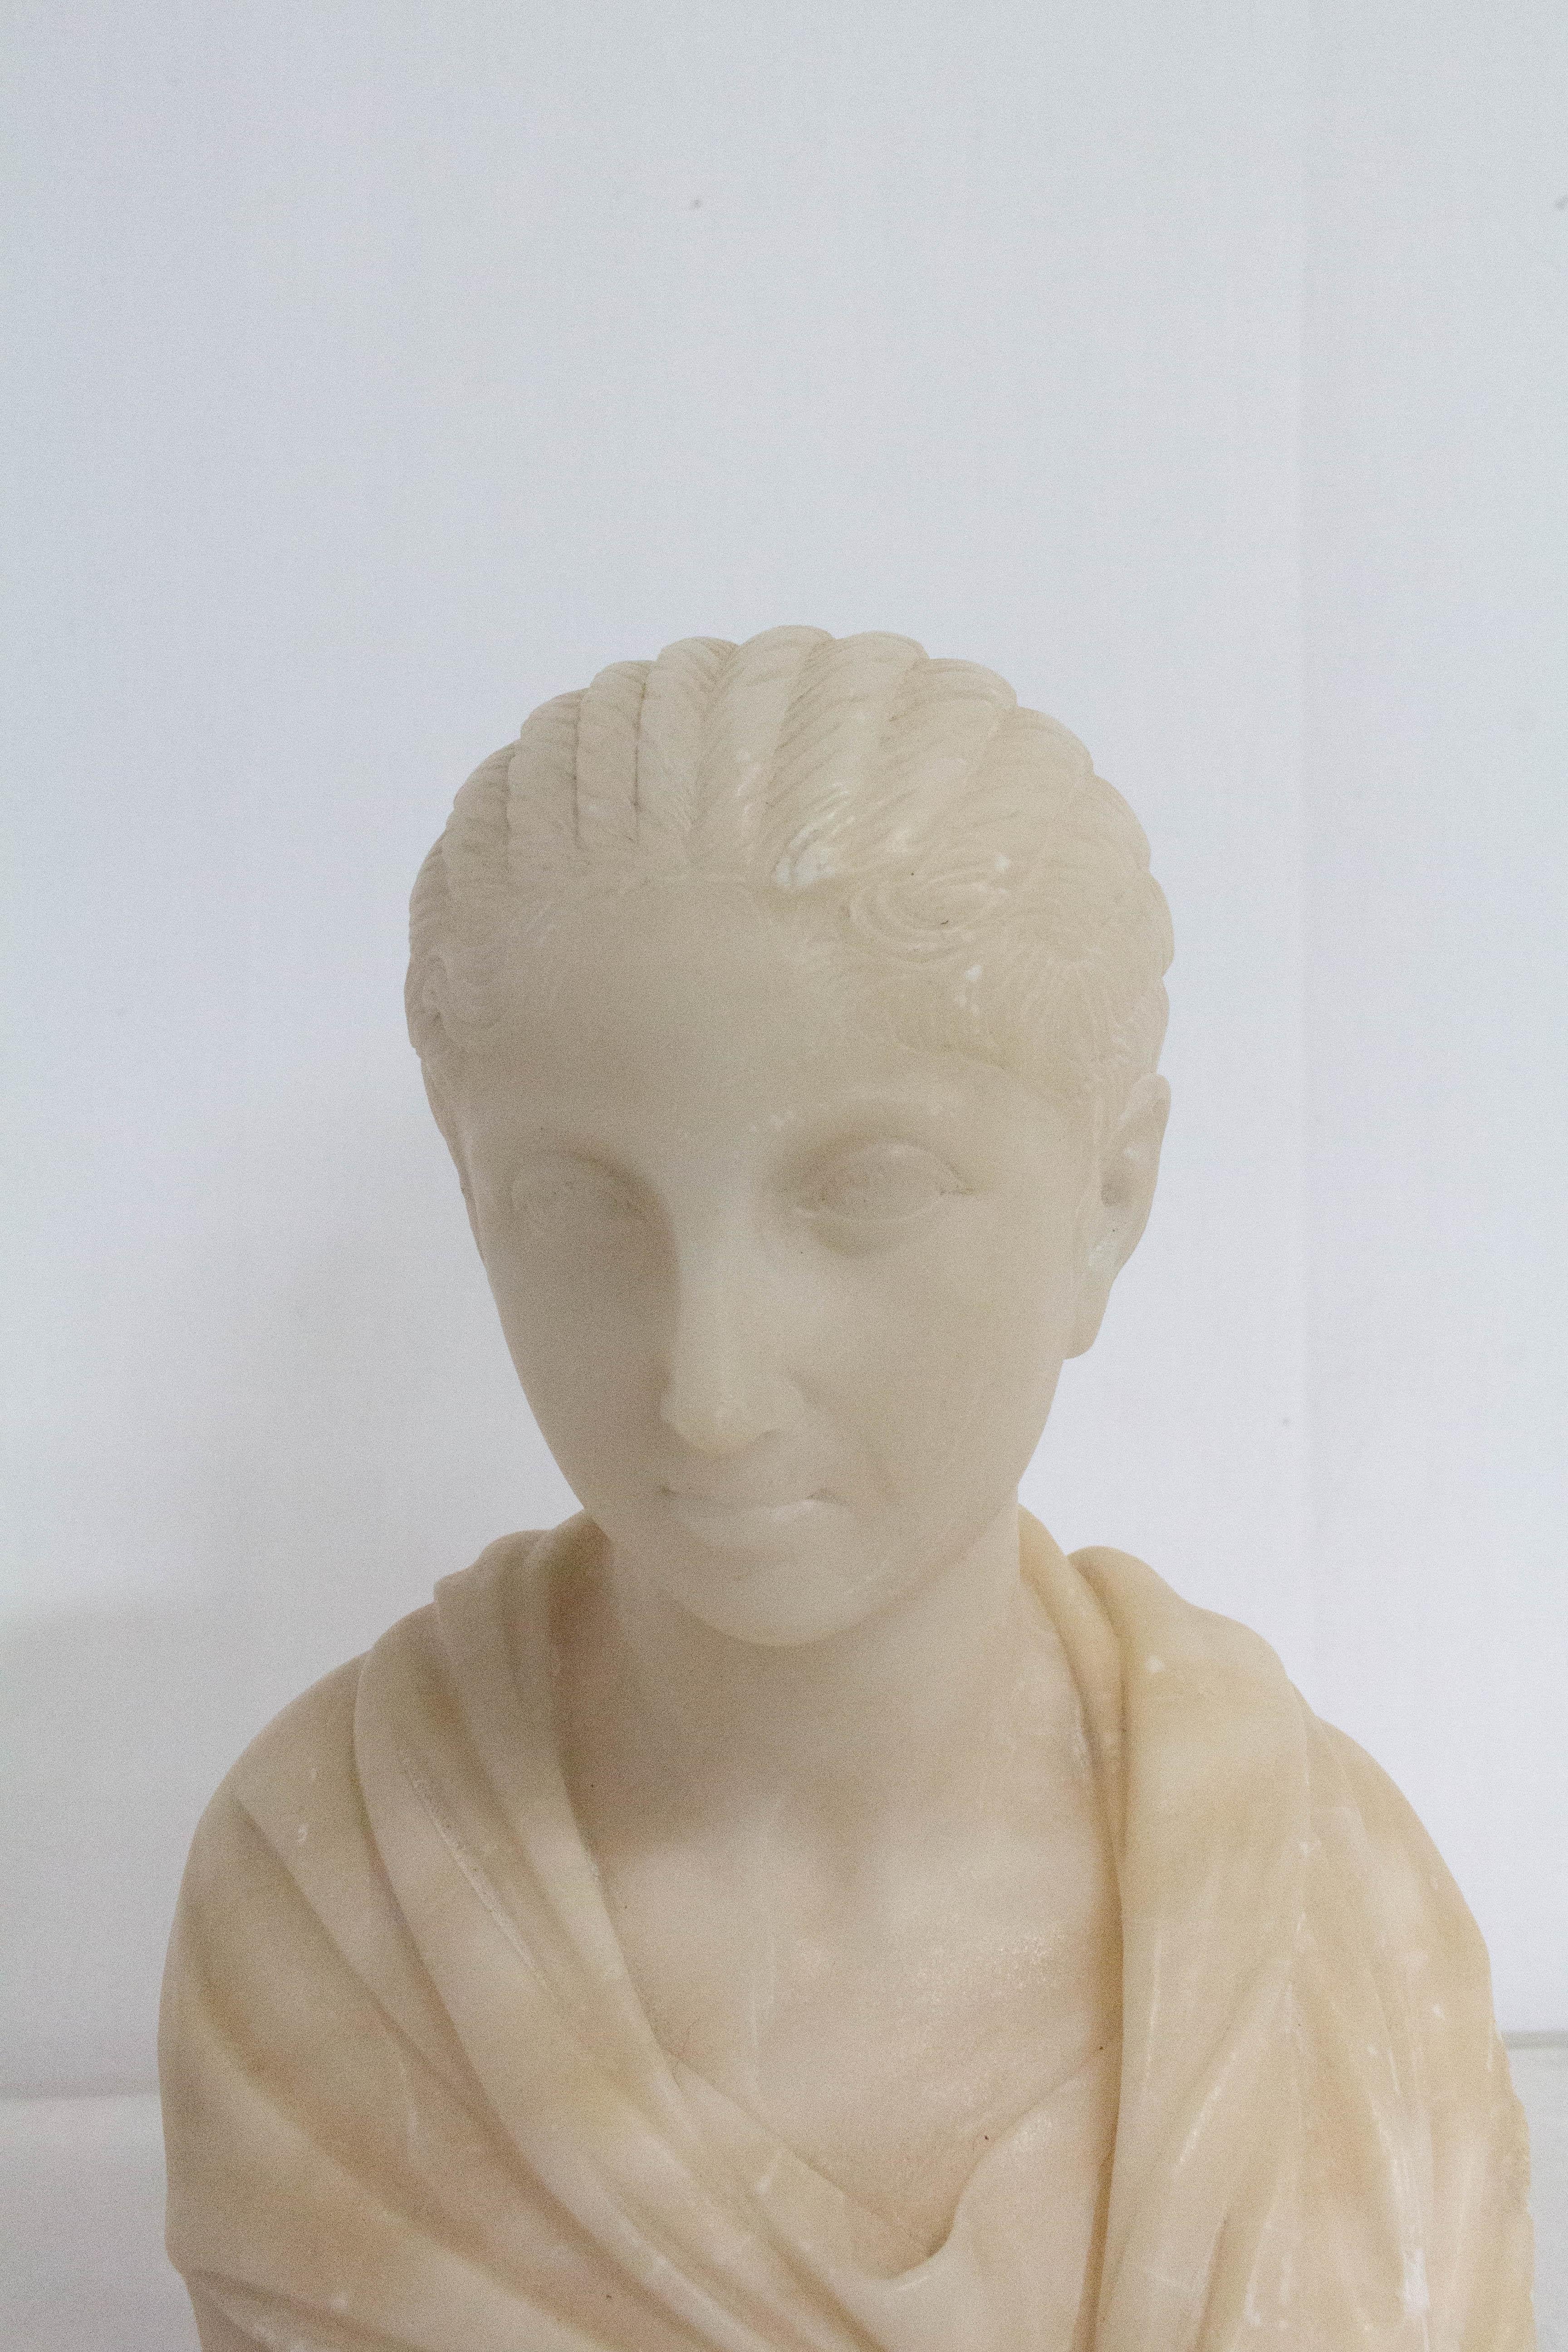 Alabaster Art Deco Albaster Plautilla Bust Neoclassic, Early 20th Century For Sale